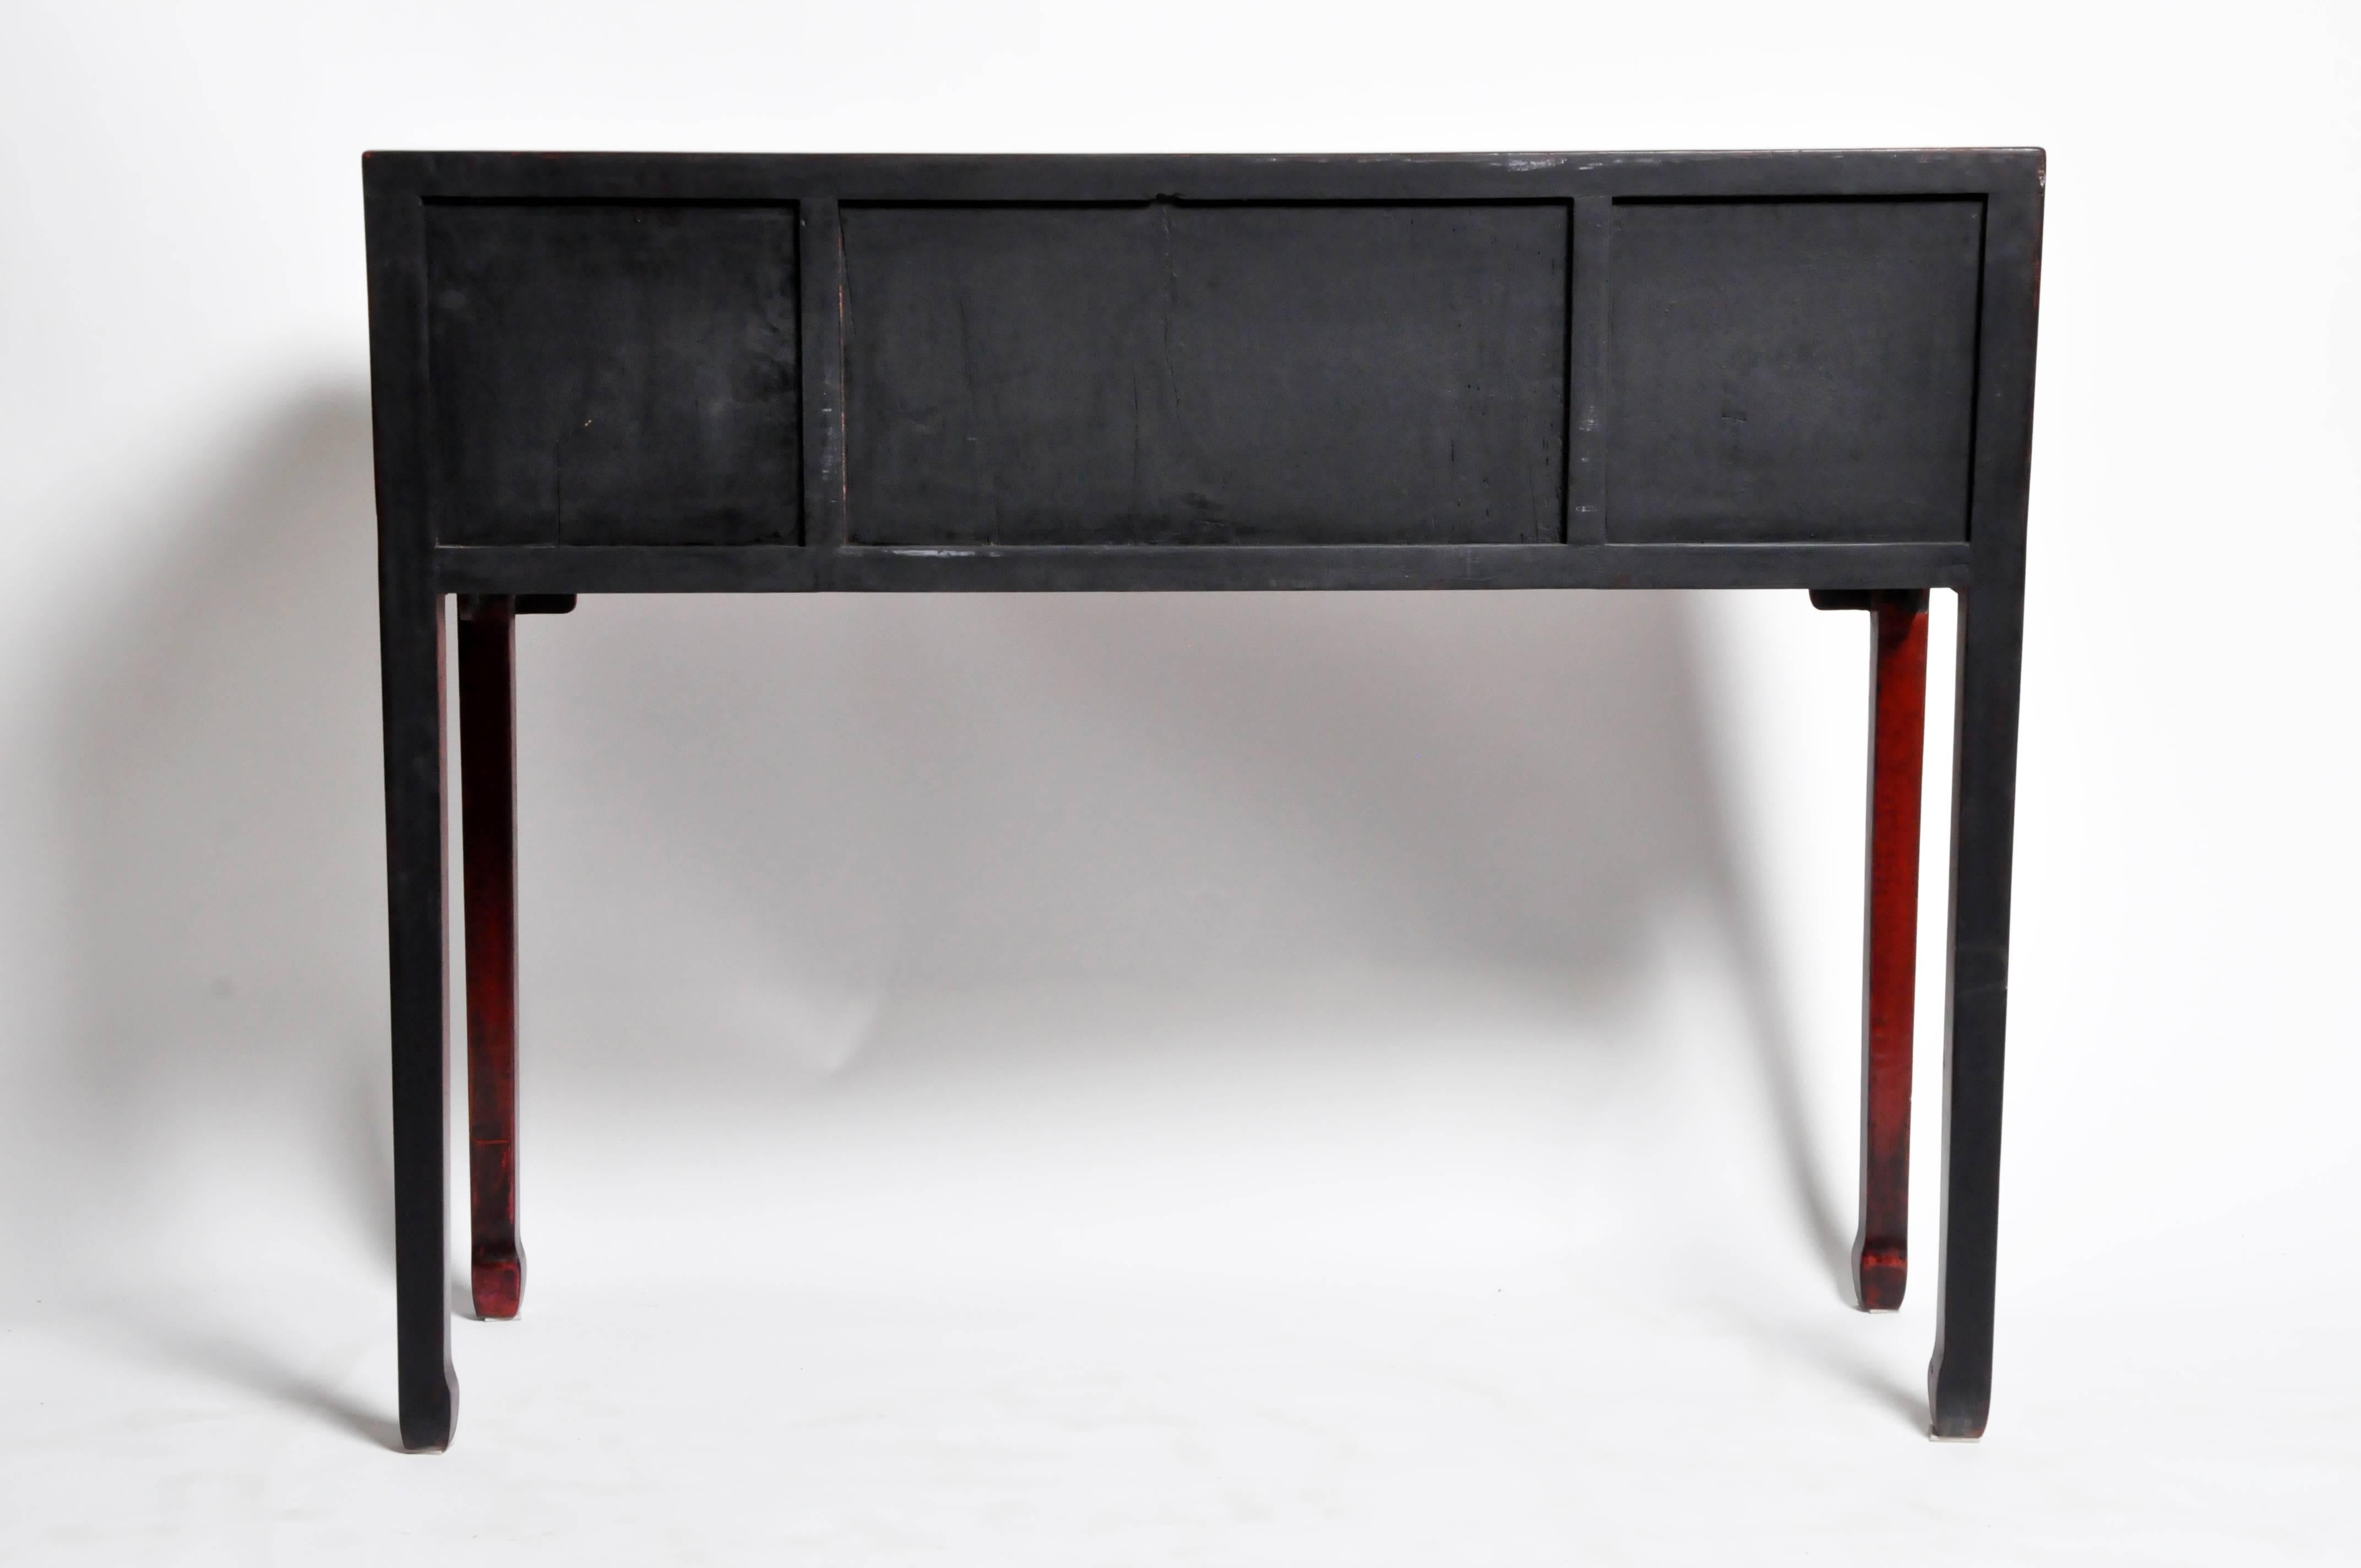 This console table is from Shandong, China and was made from reclaimed elm wood and red lacquer. The handsome piece features mortise and tenon joinery and four drawers. You can also customize a new one and make it your own. Wood, color, finish, and